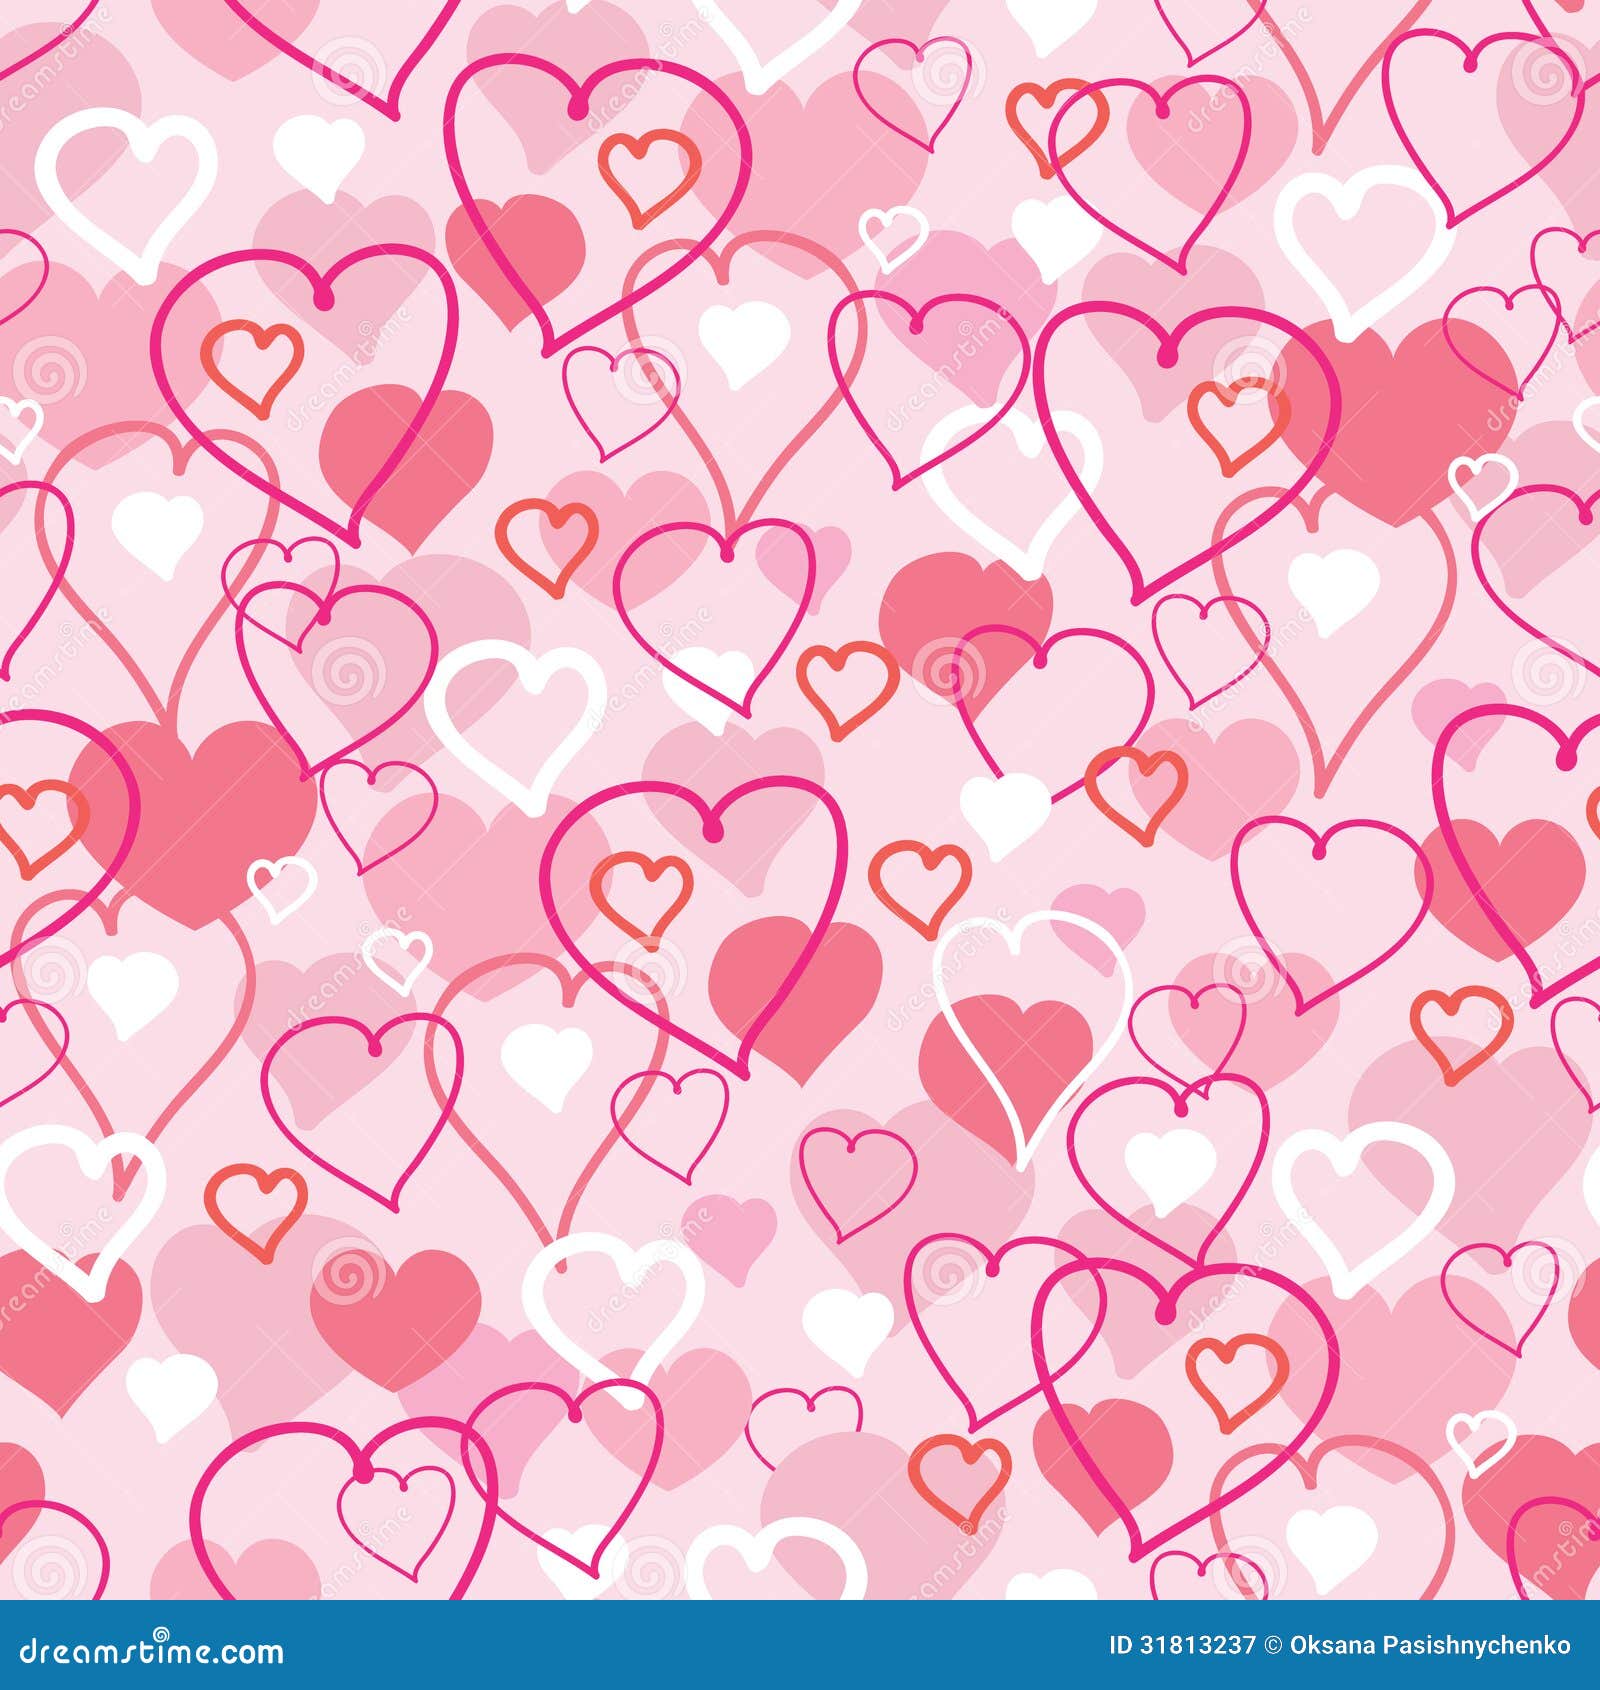 Valentine's Day Hearts Seamless Pattern Background Royalty Free Stock ...